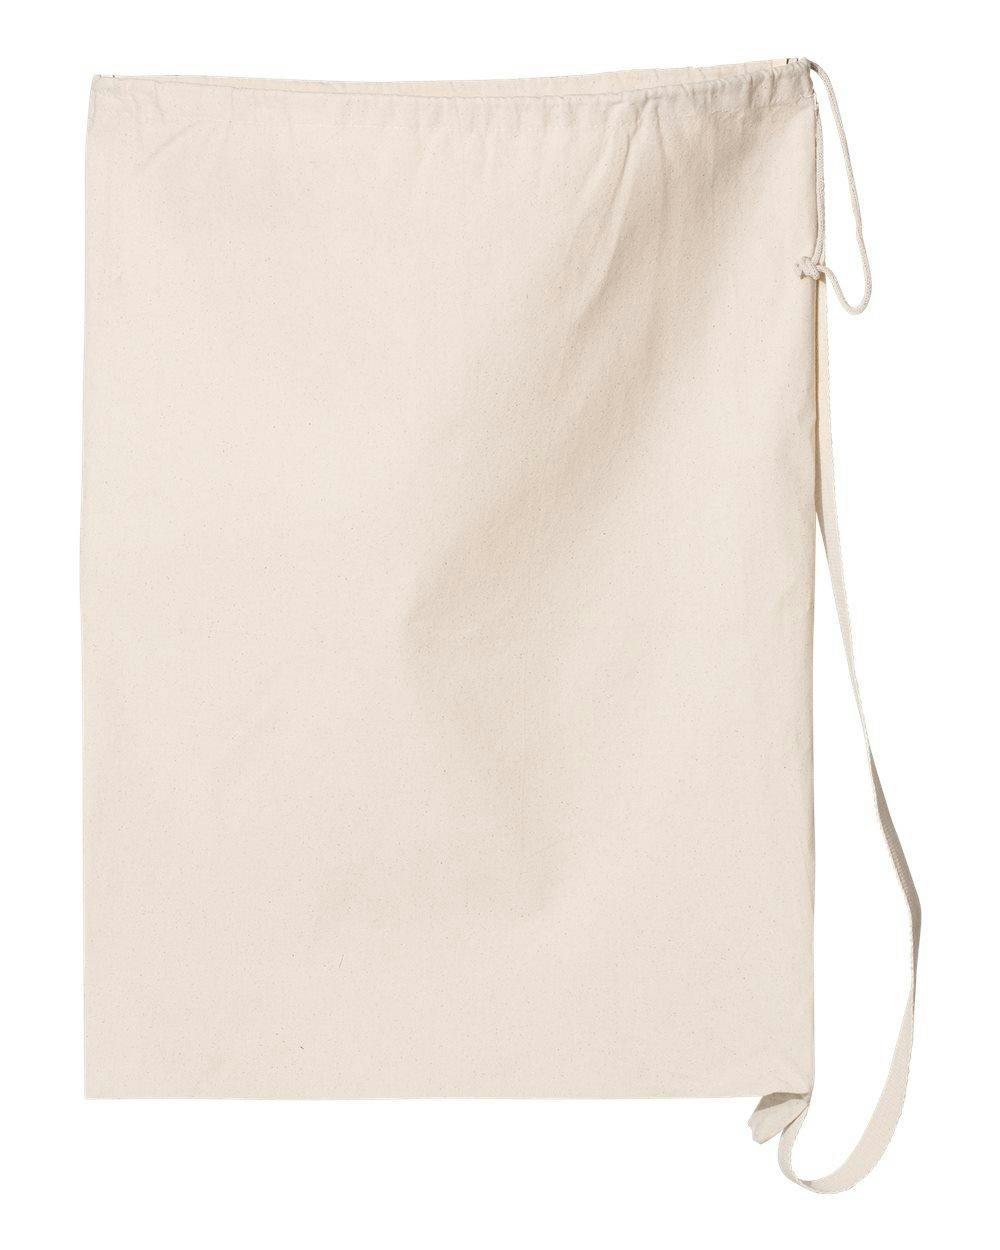 Image for Large Laundry Bag - OAD110